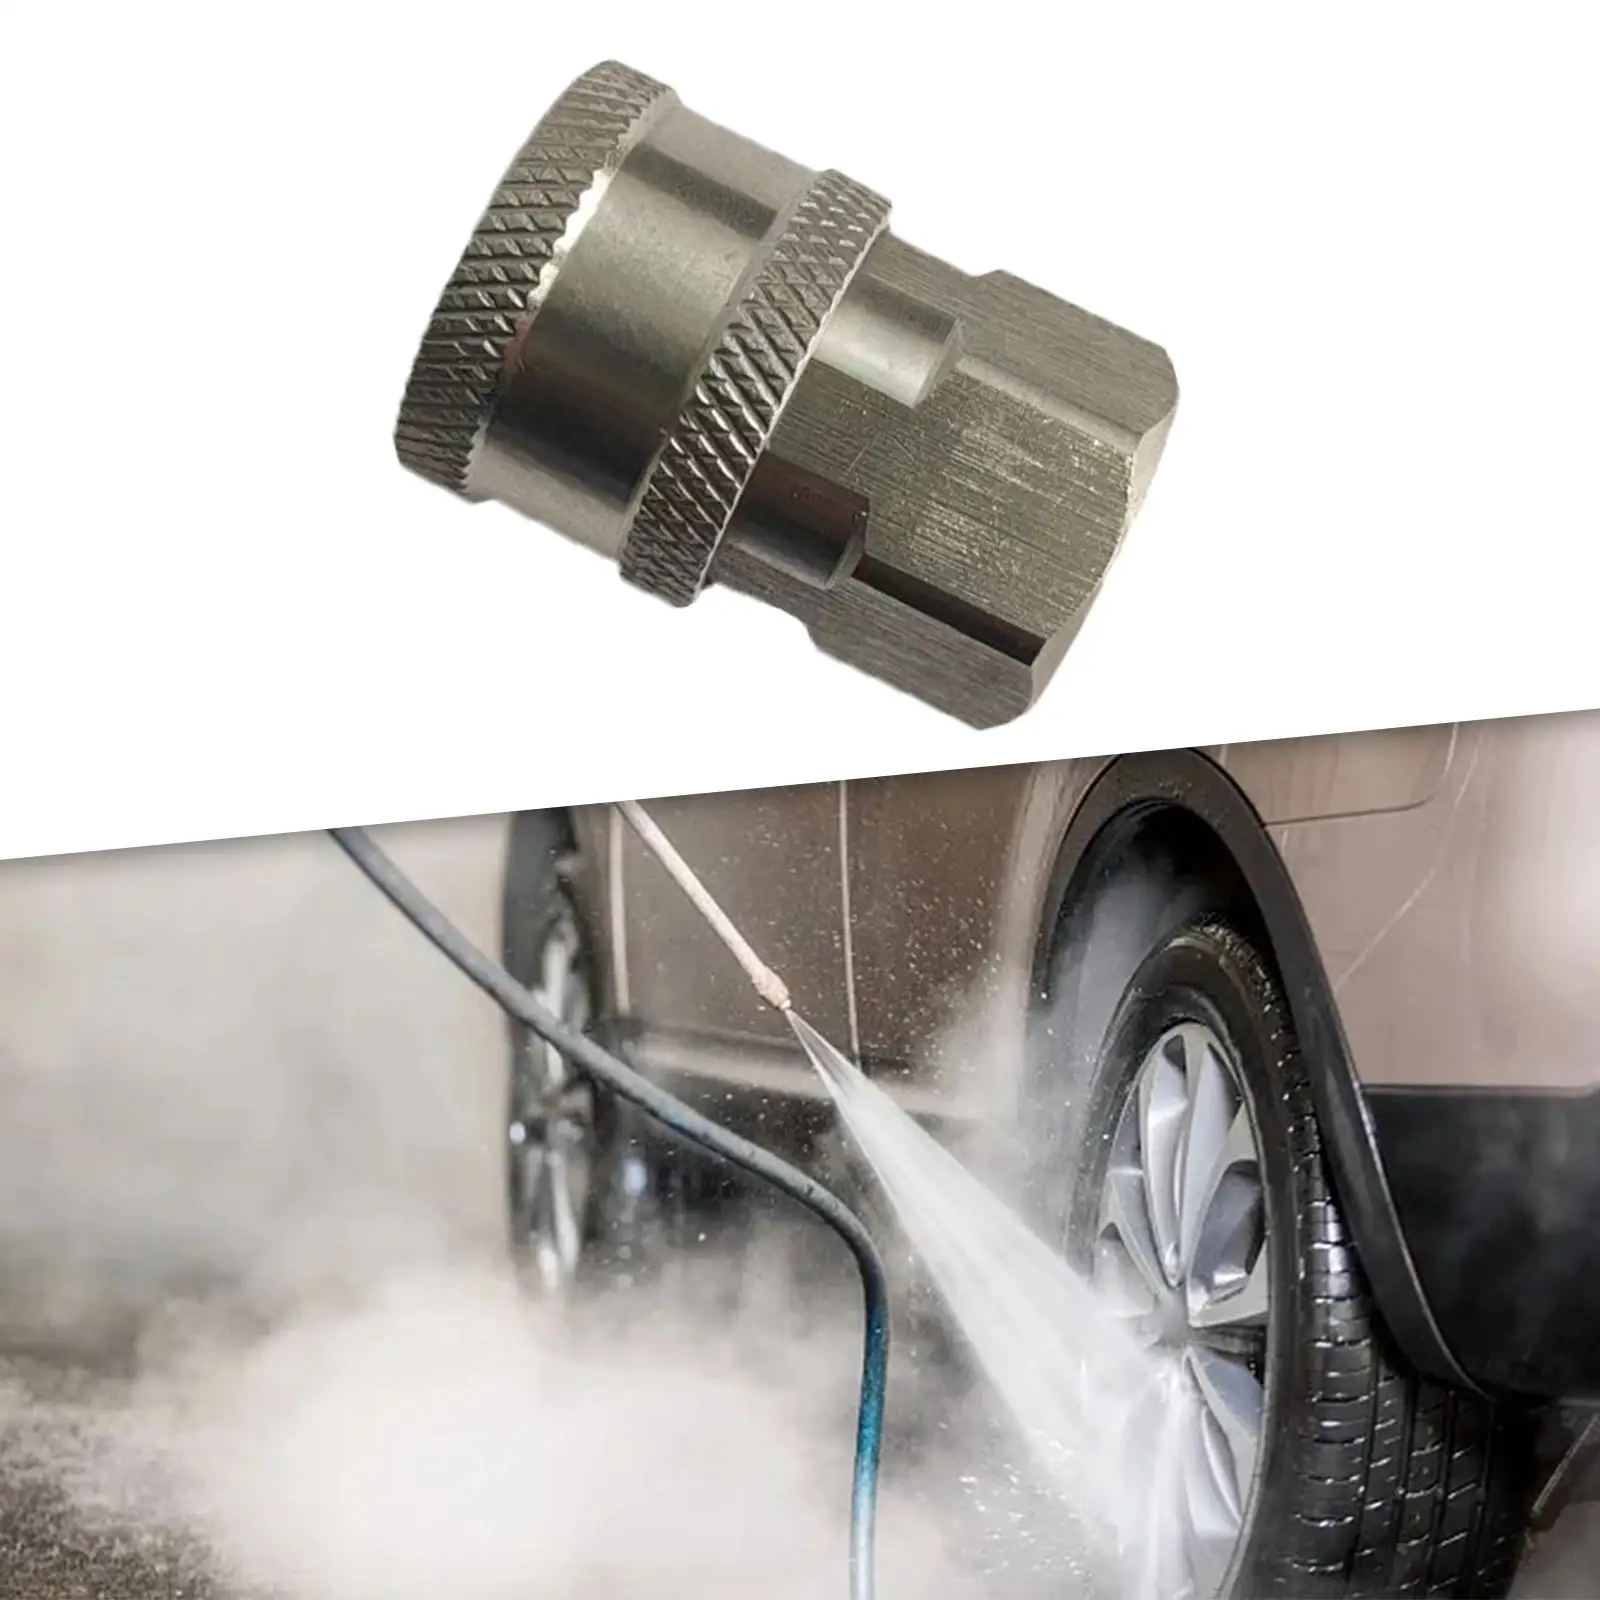 Pressure Washer Coupler 2800PSI Car Washing Accessories Connector 1/4 inch Male Pipe for Repair Garden Truck Cleaning Kitchen